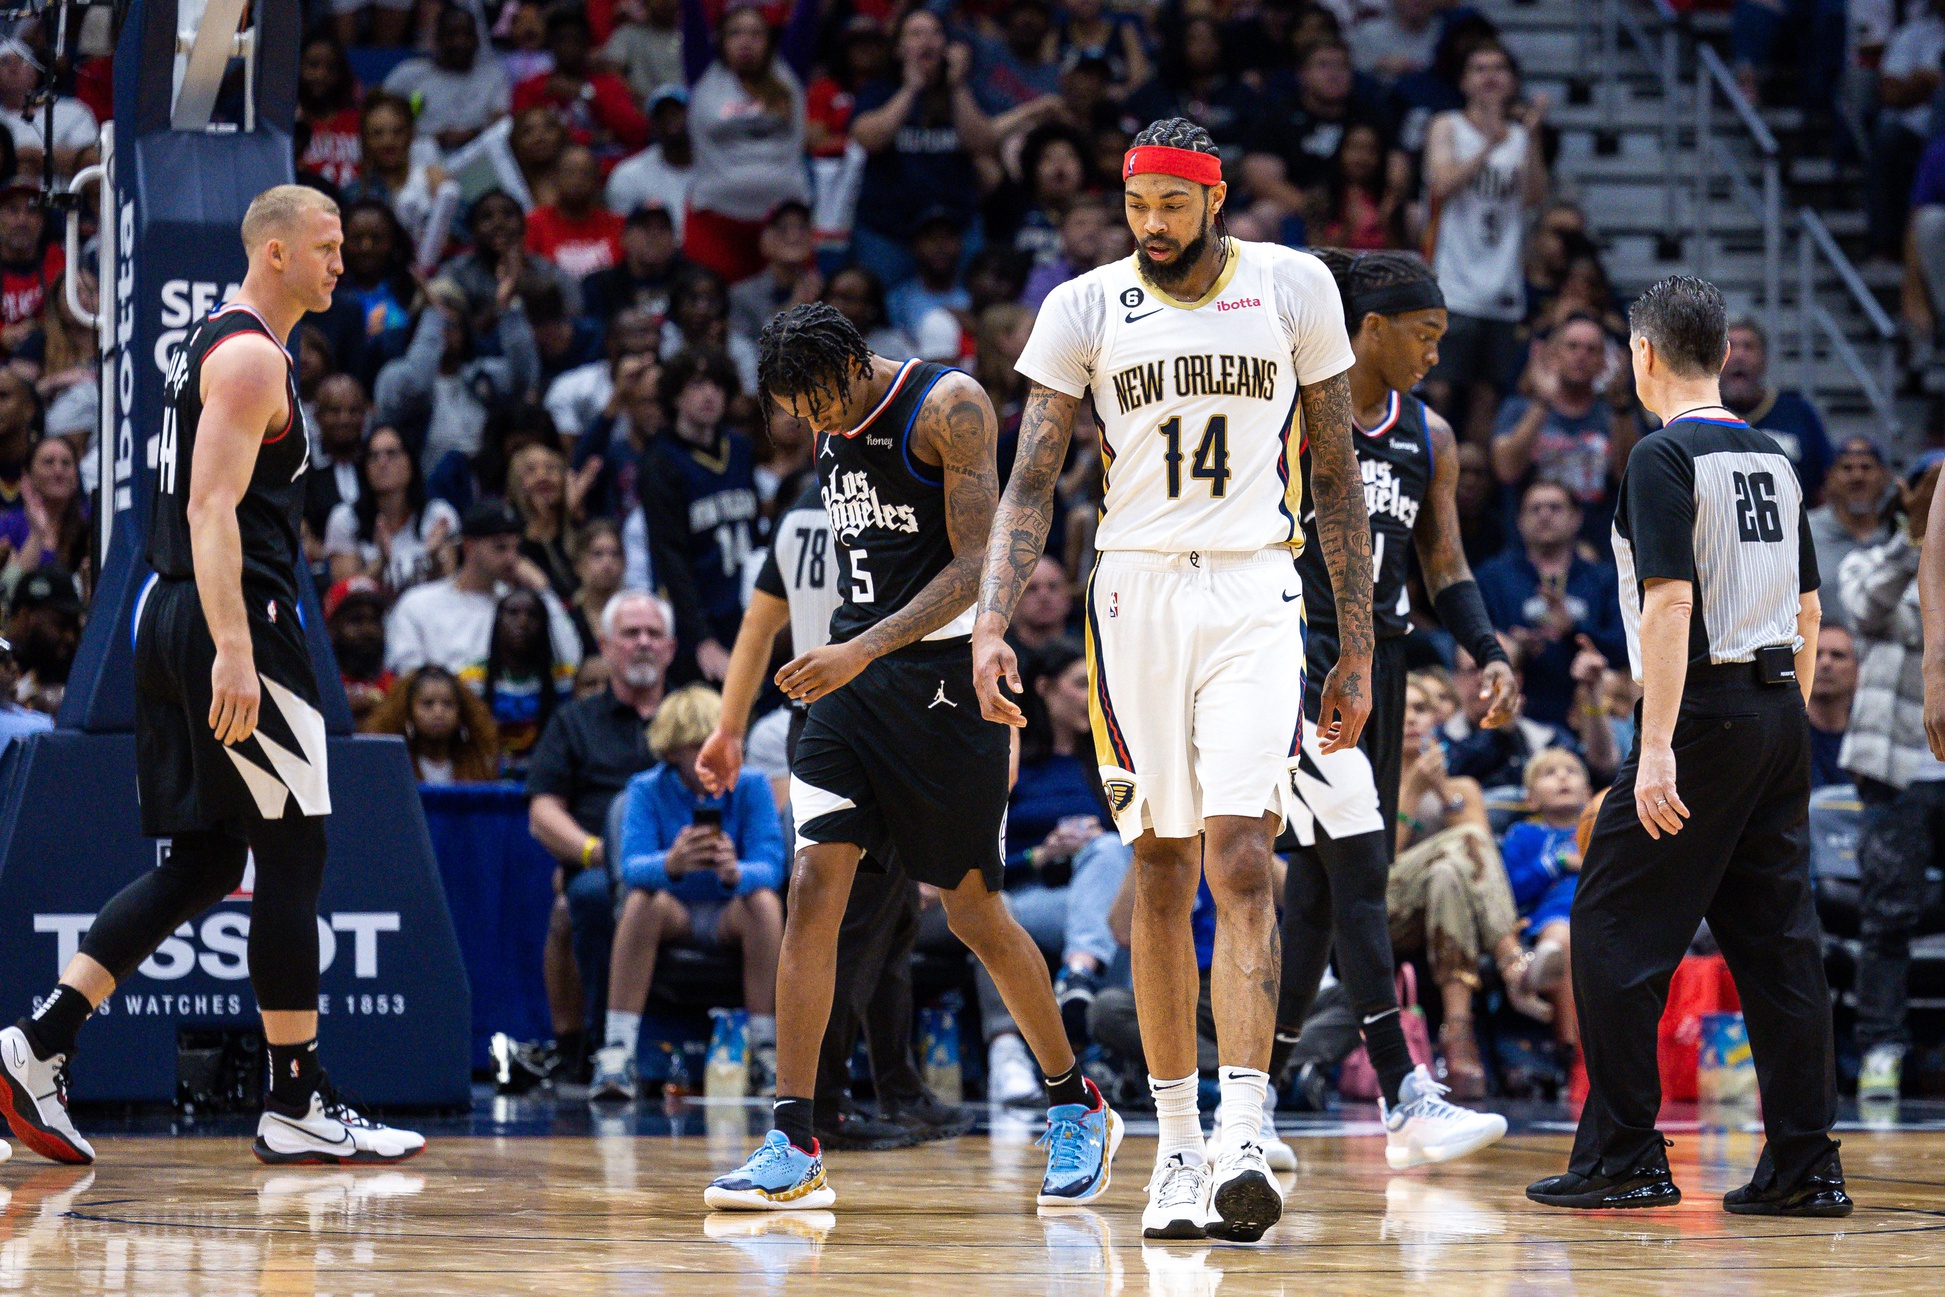 Apr 1, 2023; New Orleans, Louisiana, USA; New Orleans Pelicans forward Brandon Ingram (14) reacts during a stop in play after being fouled by LA Clippers center Mason Plumlee (44) during the second half at Smoothie King Center. Mandatory Credit: Stephen Lew-USA TODAY Sports NBA Rumors